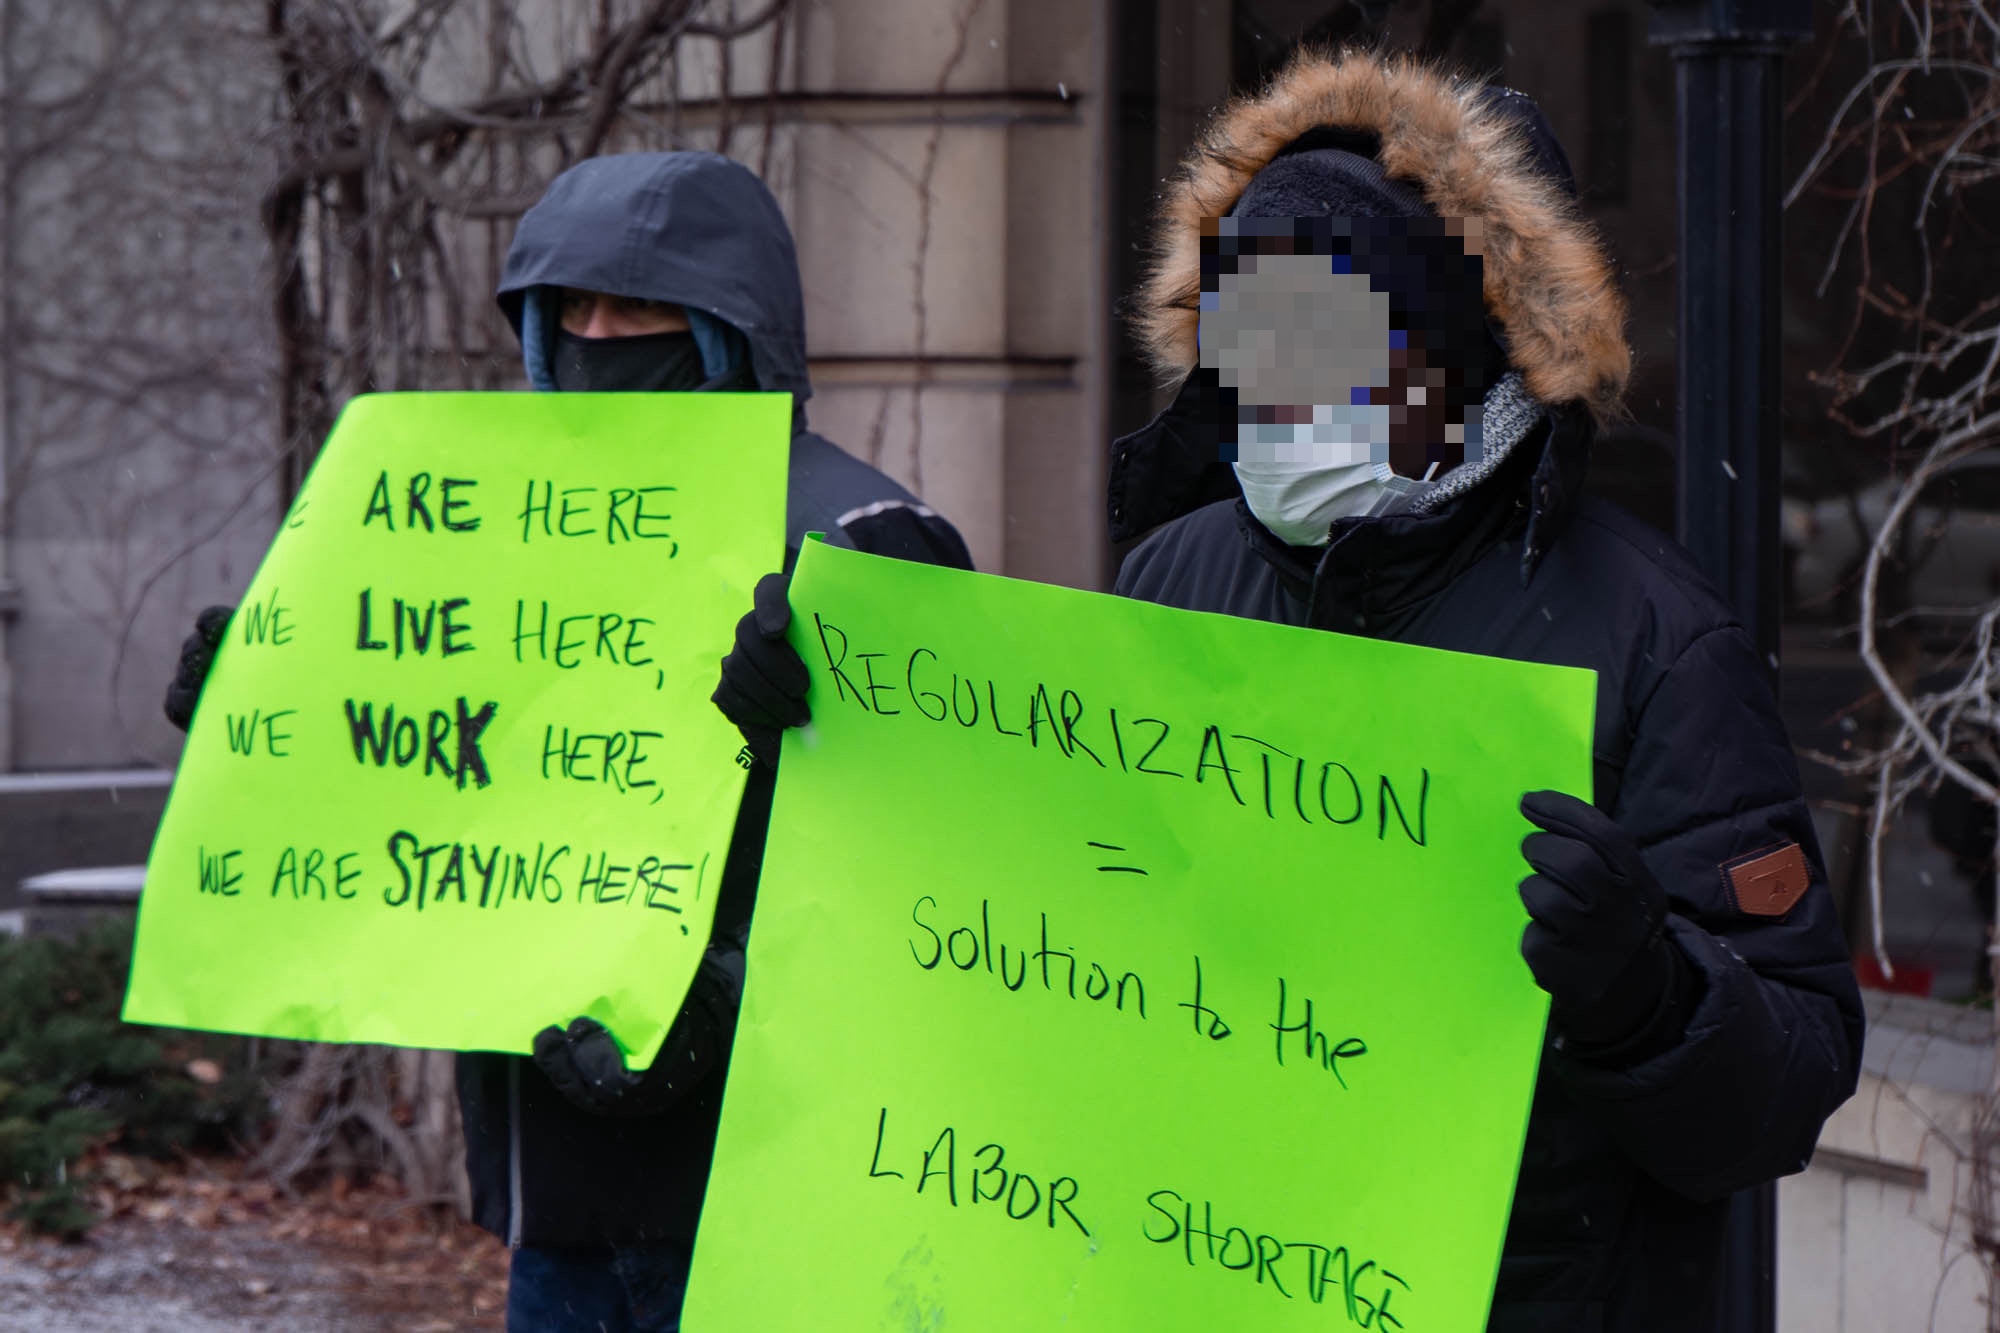 Two racialized people hold up signs outside in winter. One is light green with black text reading "Regularisation = solution to the labour shortage." Photo from a Solidarity Across Borders event in December 2021 in Montreal, Undocumented migrants have a solution to the labor shortage: Status for all. Photo: Solidarity Across Borders.